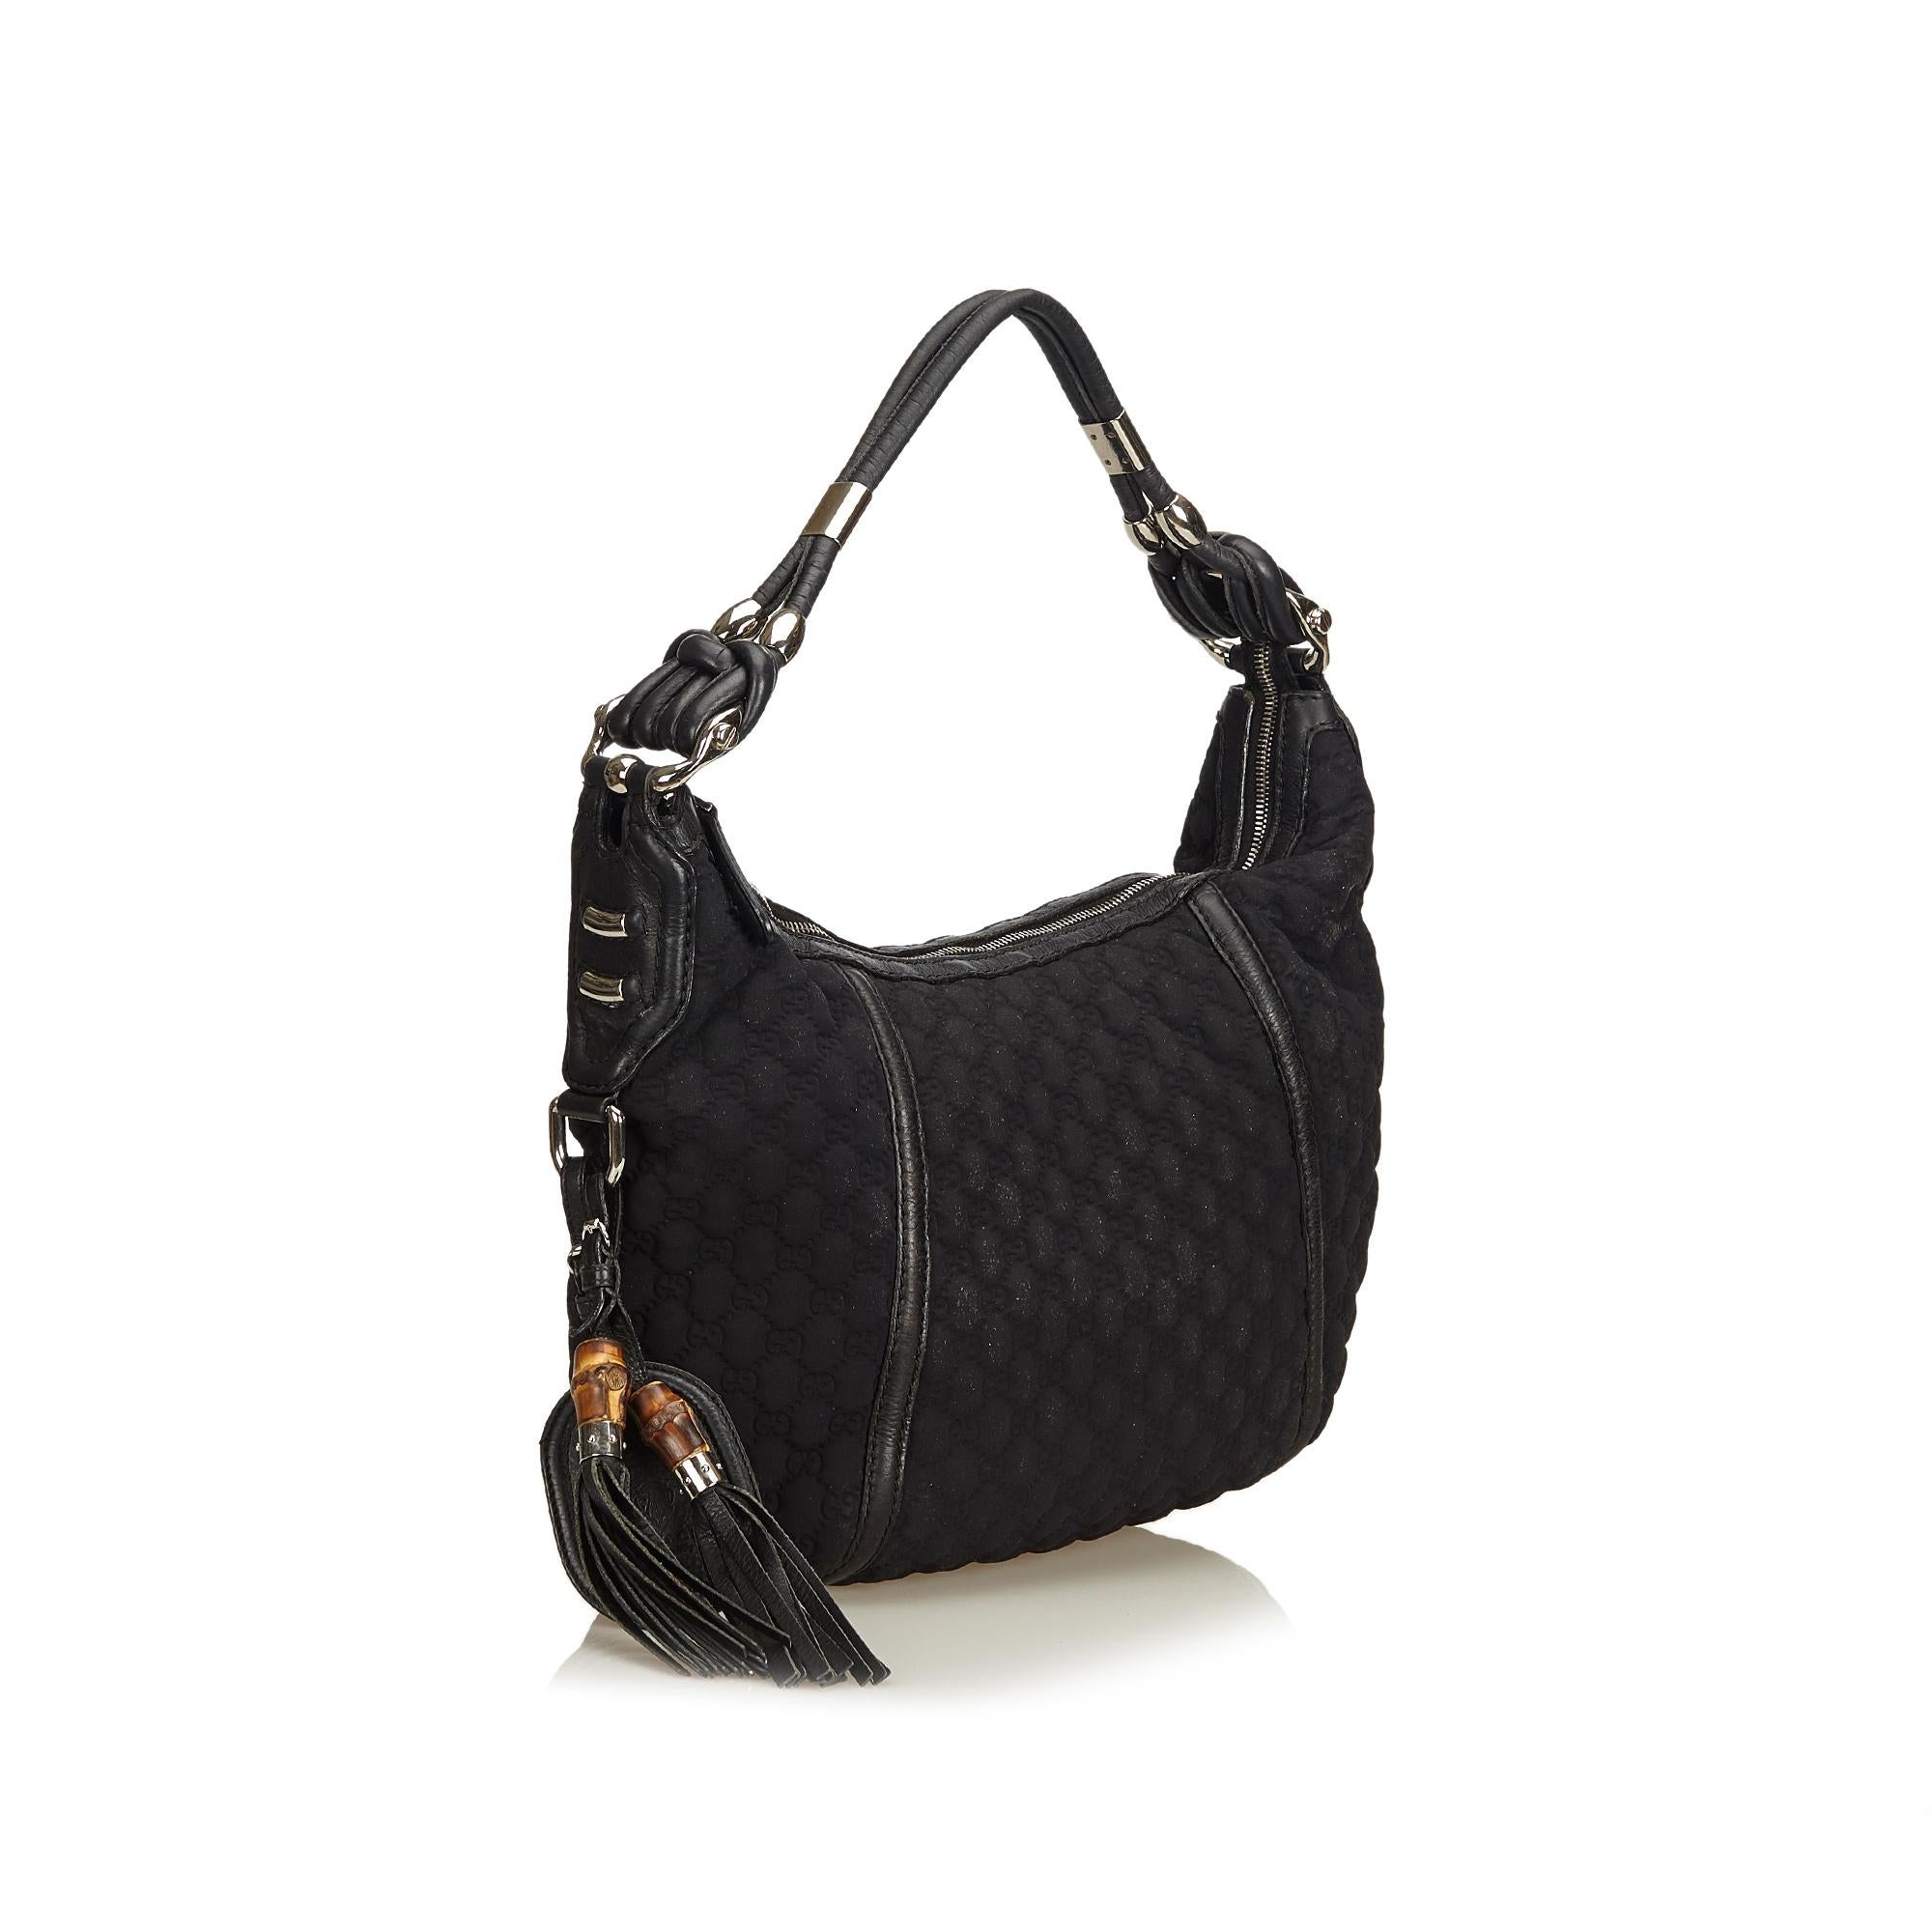 This Techno hobo bag features a quilted nylon body, rolled leather strap, top zip closure, tassel detail, and interior zip pocket. It carries as B condition rating.

Inclusions: 
This item does not come with inclusions.

Dimensions:
Length: 33.00